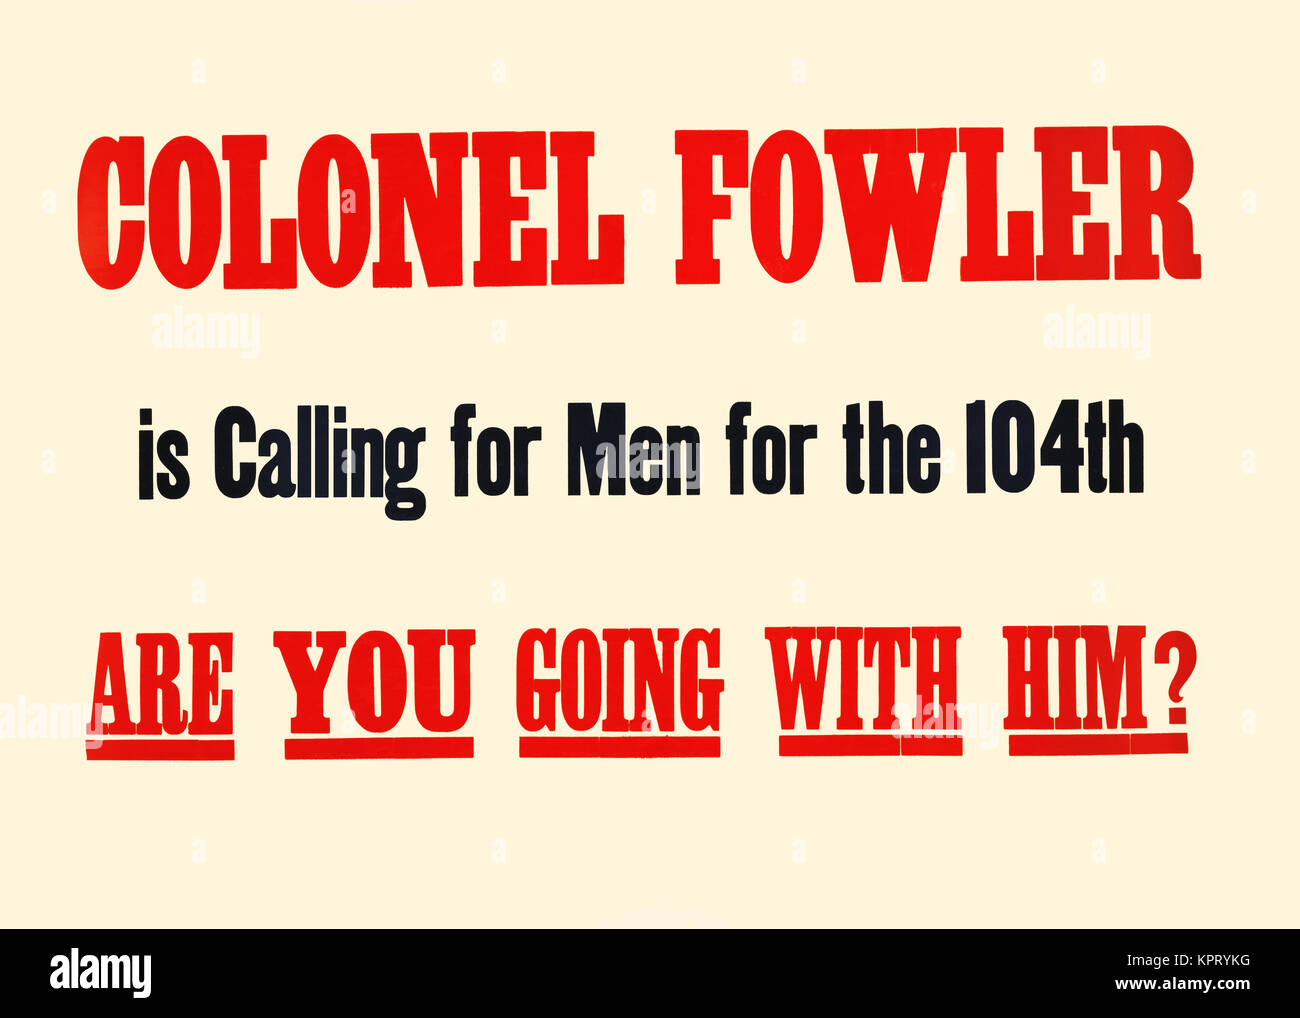 Colonel Fowler is calling for men for the 104th Stock Photo